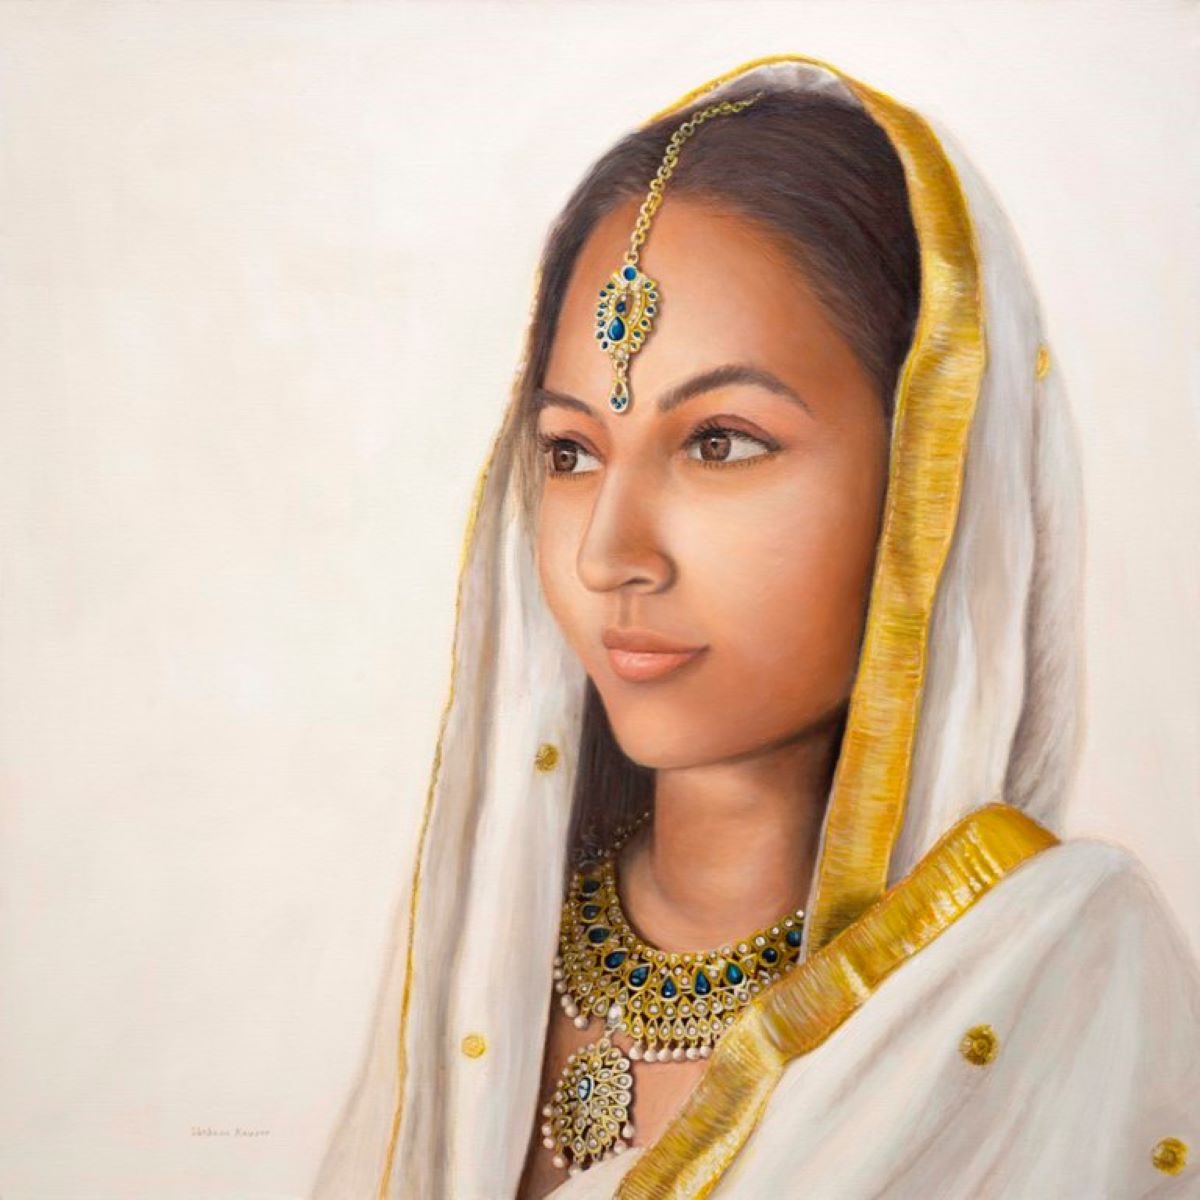 Painting of South Asian woman